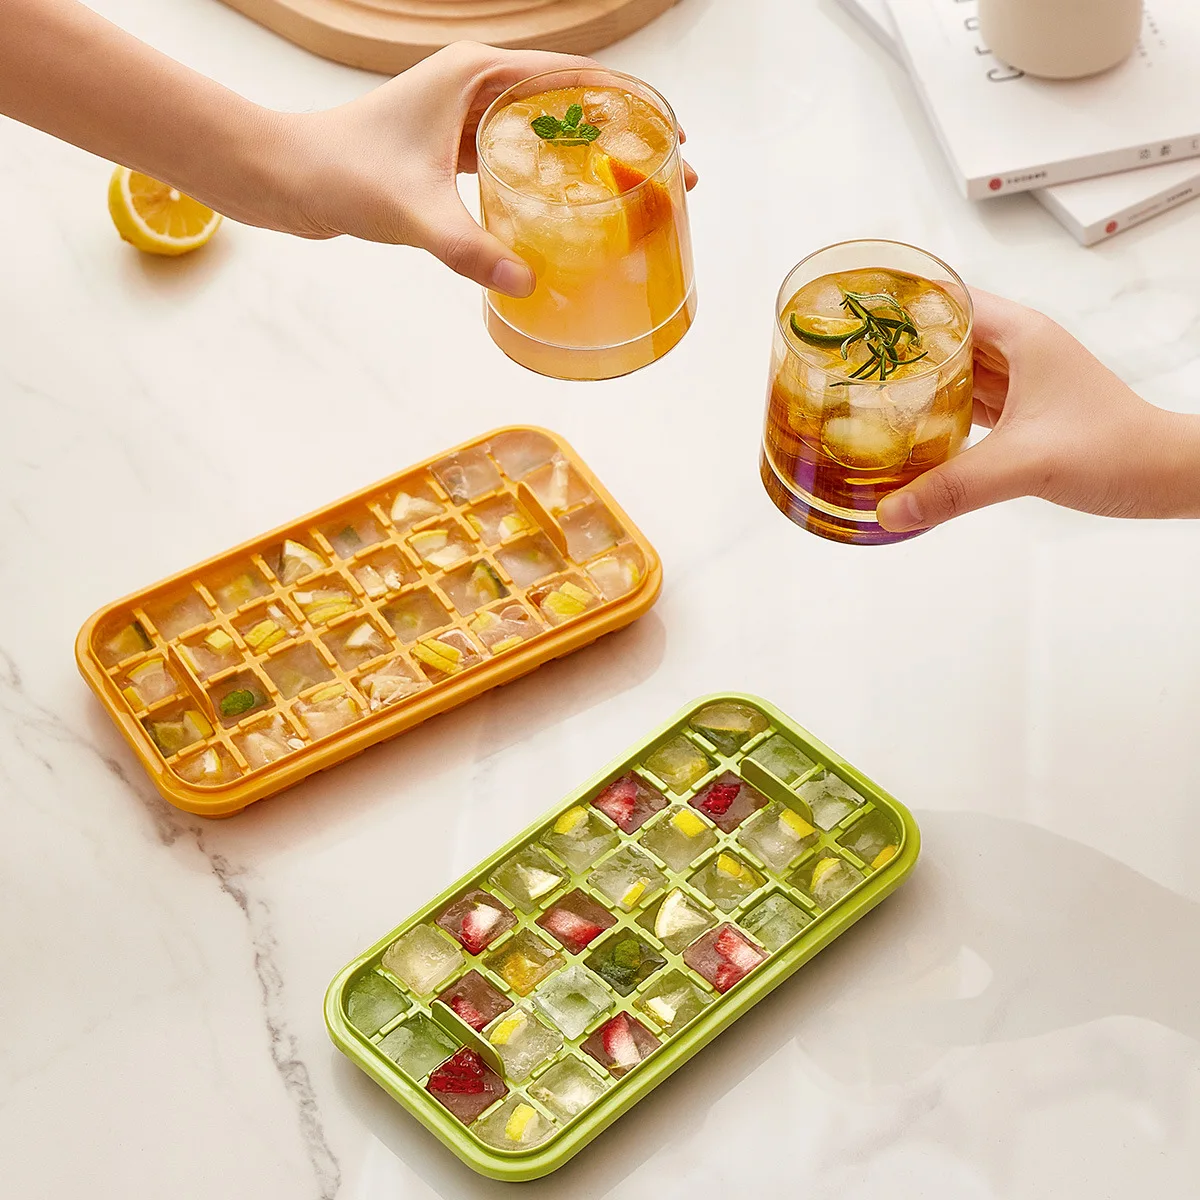 https://ae01.alicdn.com/kf/S795de10b1326466e9a9134a21ef6ebe1m/Ice-Cube-Tray-One-Click-Fall-Off-Easy-Release-32-Cavity-Silicone-Ice-Mold-For-Cocktail.jpg